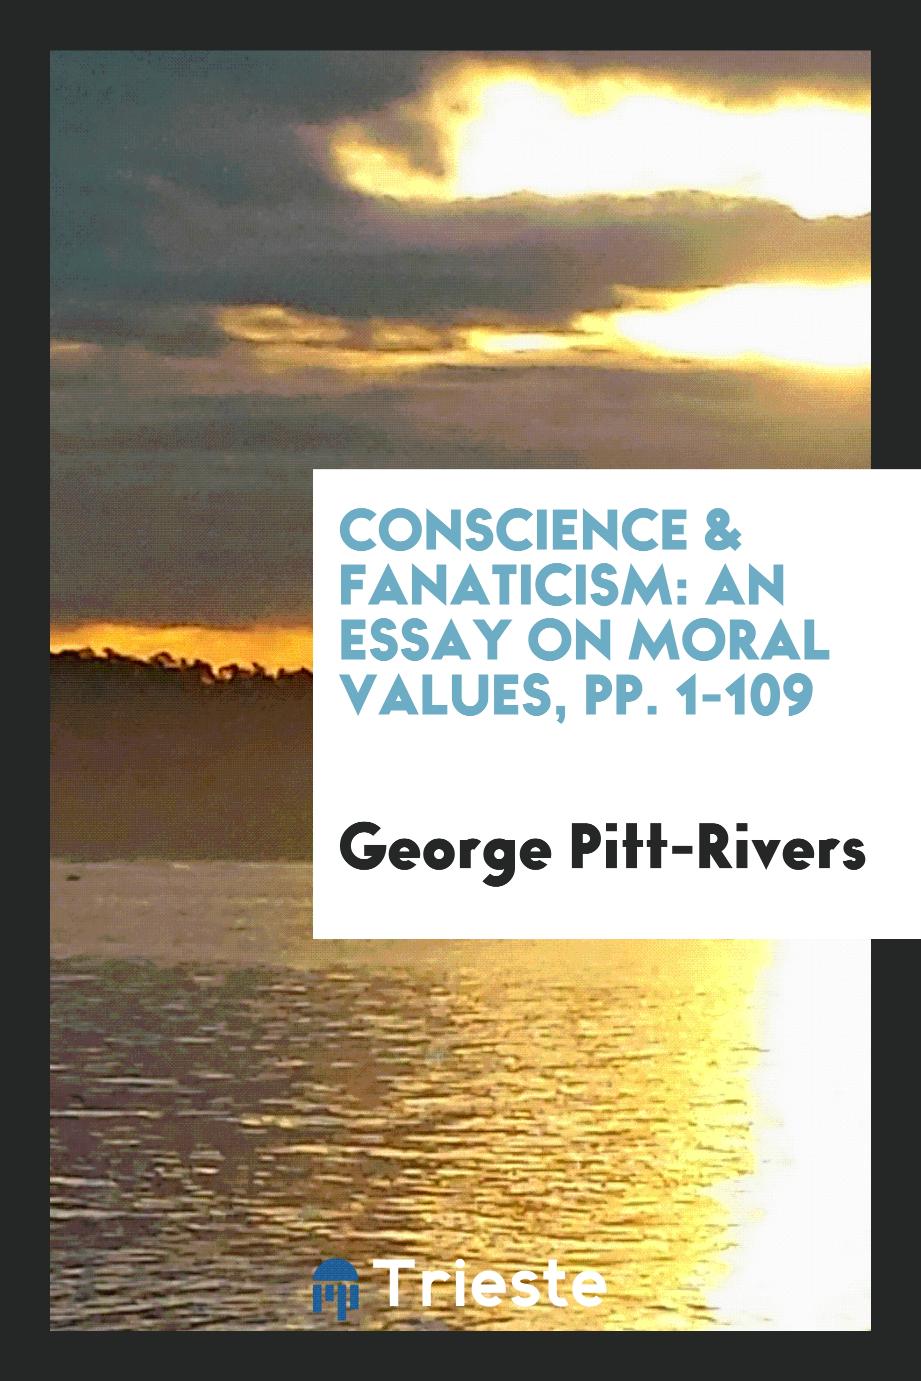 Conscience & Fanaticism: An Essay on Moral Values, pp. 1-109